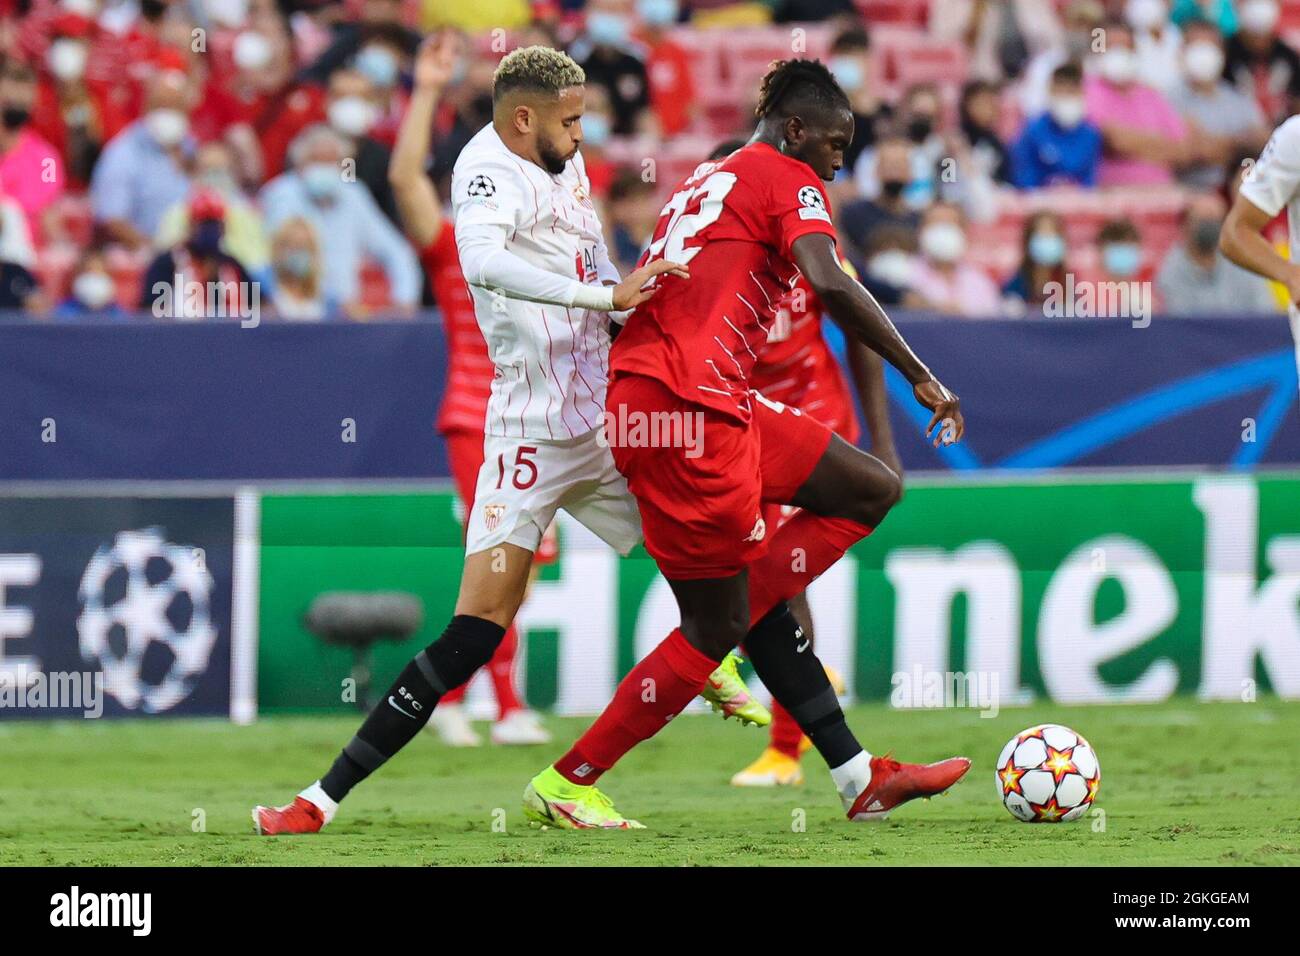 Seville, Spain, 14/09/2021, Youssef En-Nesyri of Sevilla CF in action with  Oumar Solet of RB Salzburg during the UEFA Champions League Group G stage  match between Sevilla FC and RB Salzburg at